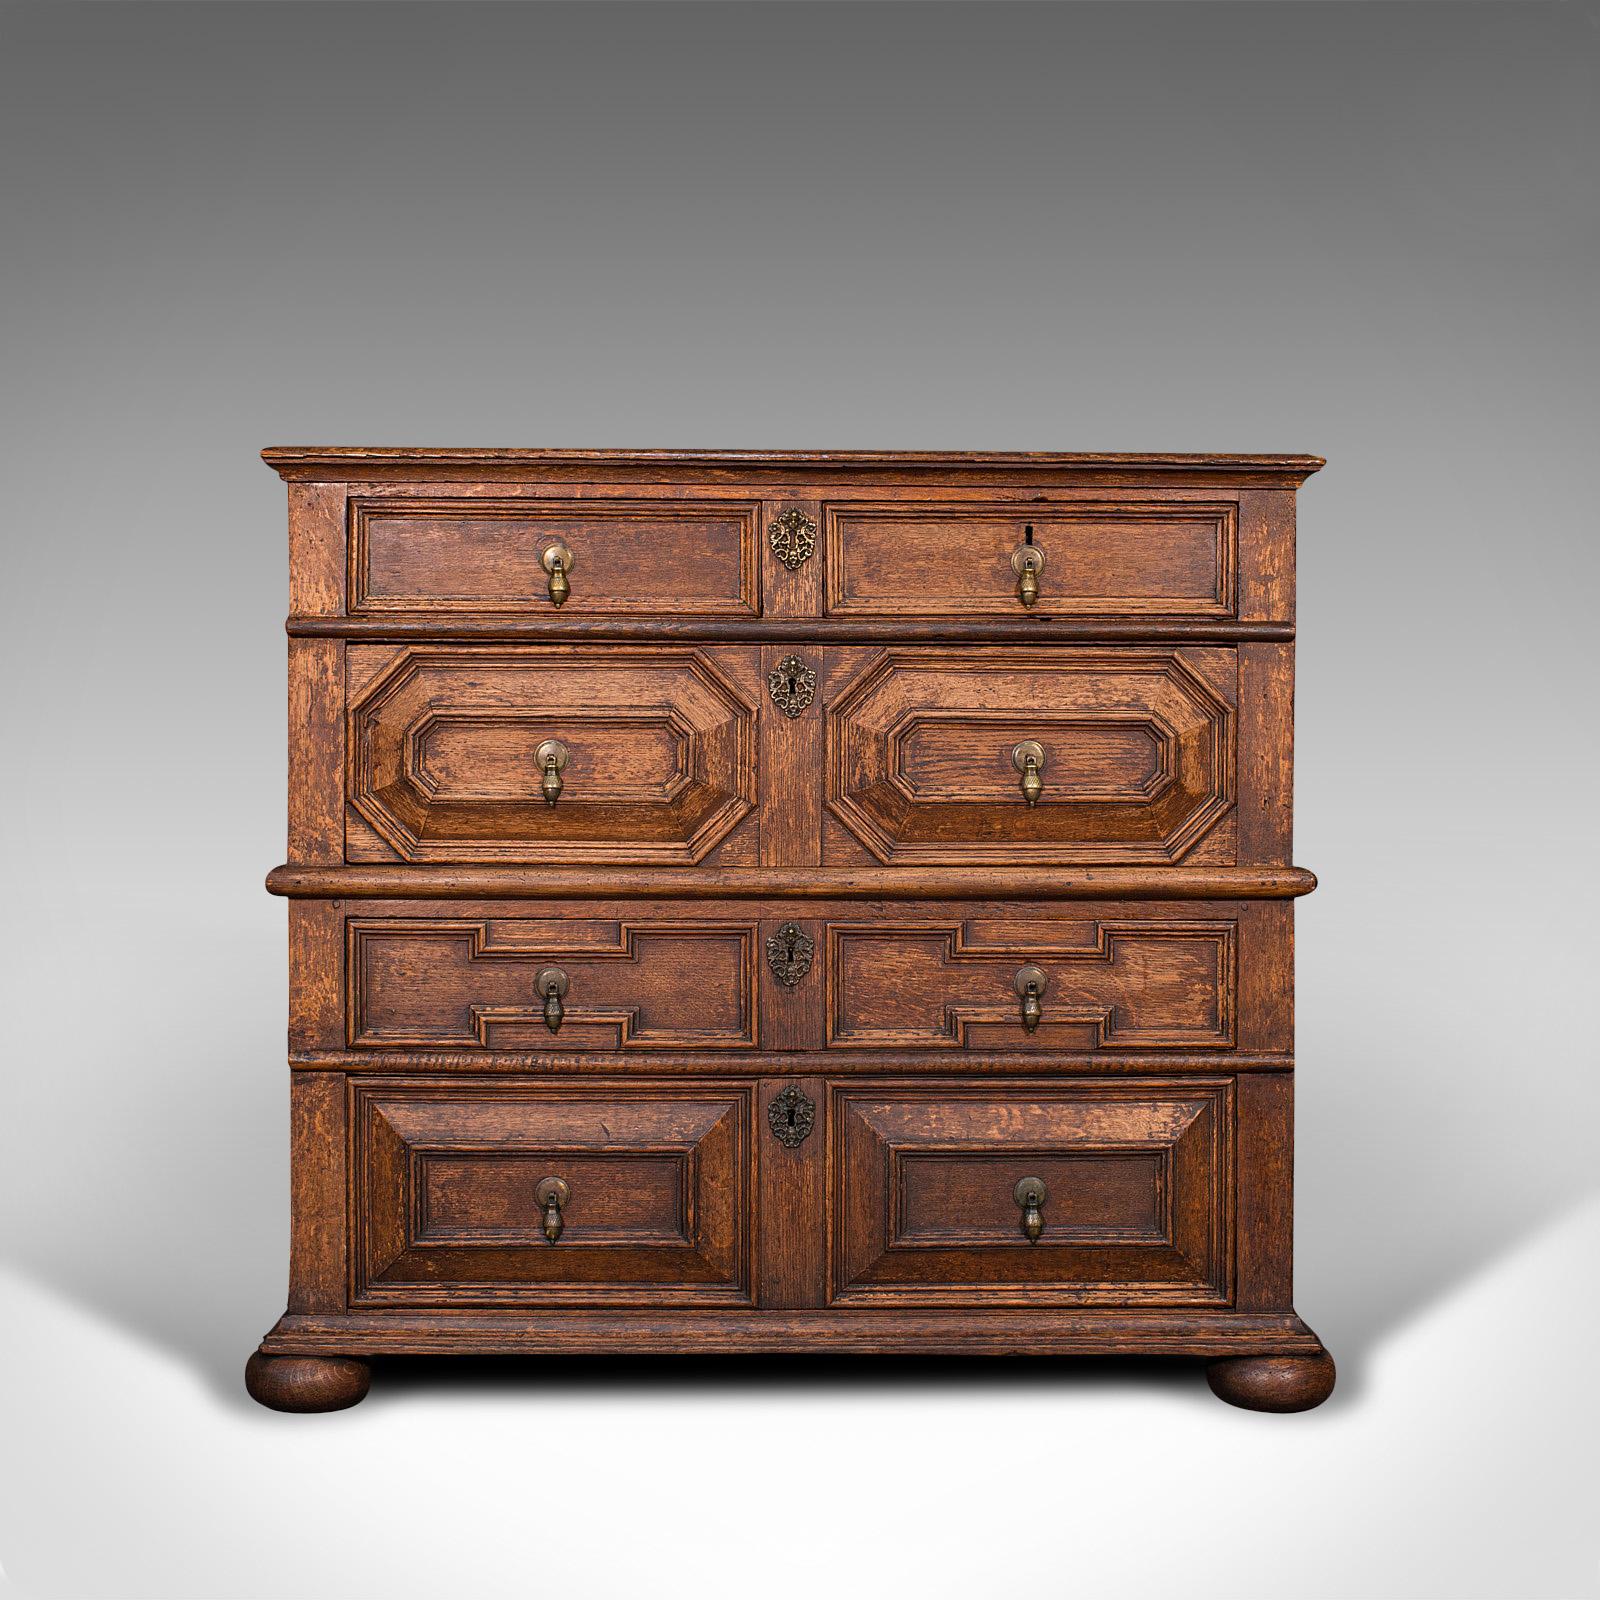 This is an antique two piece chest of drawers. An English, oak bedroom or hall tallboy cabinet, dating to the William III period of the late 17th century, circa 1700.

Fascinating example of late 17th century furniture
Displaying a desirable aged